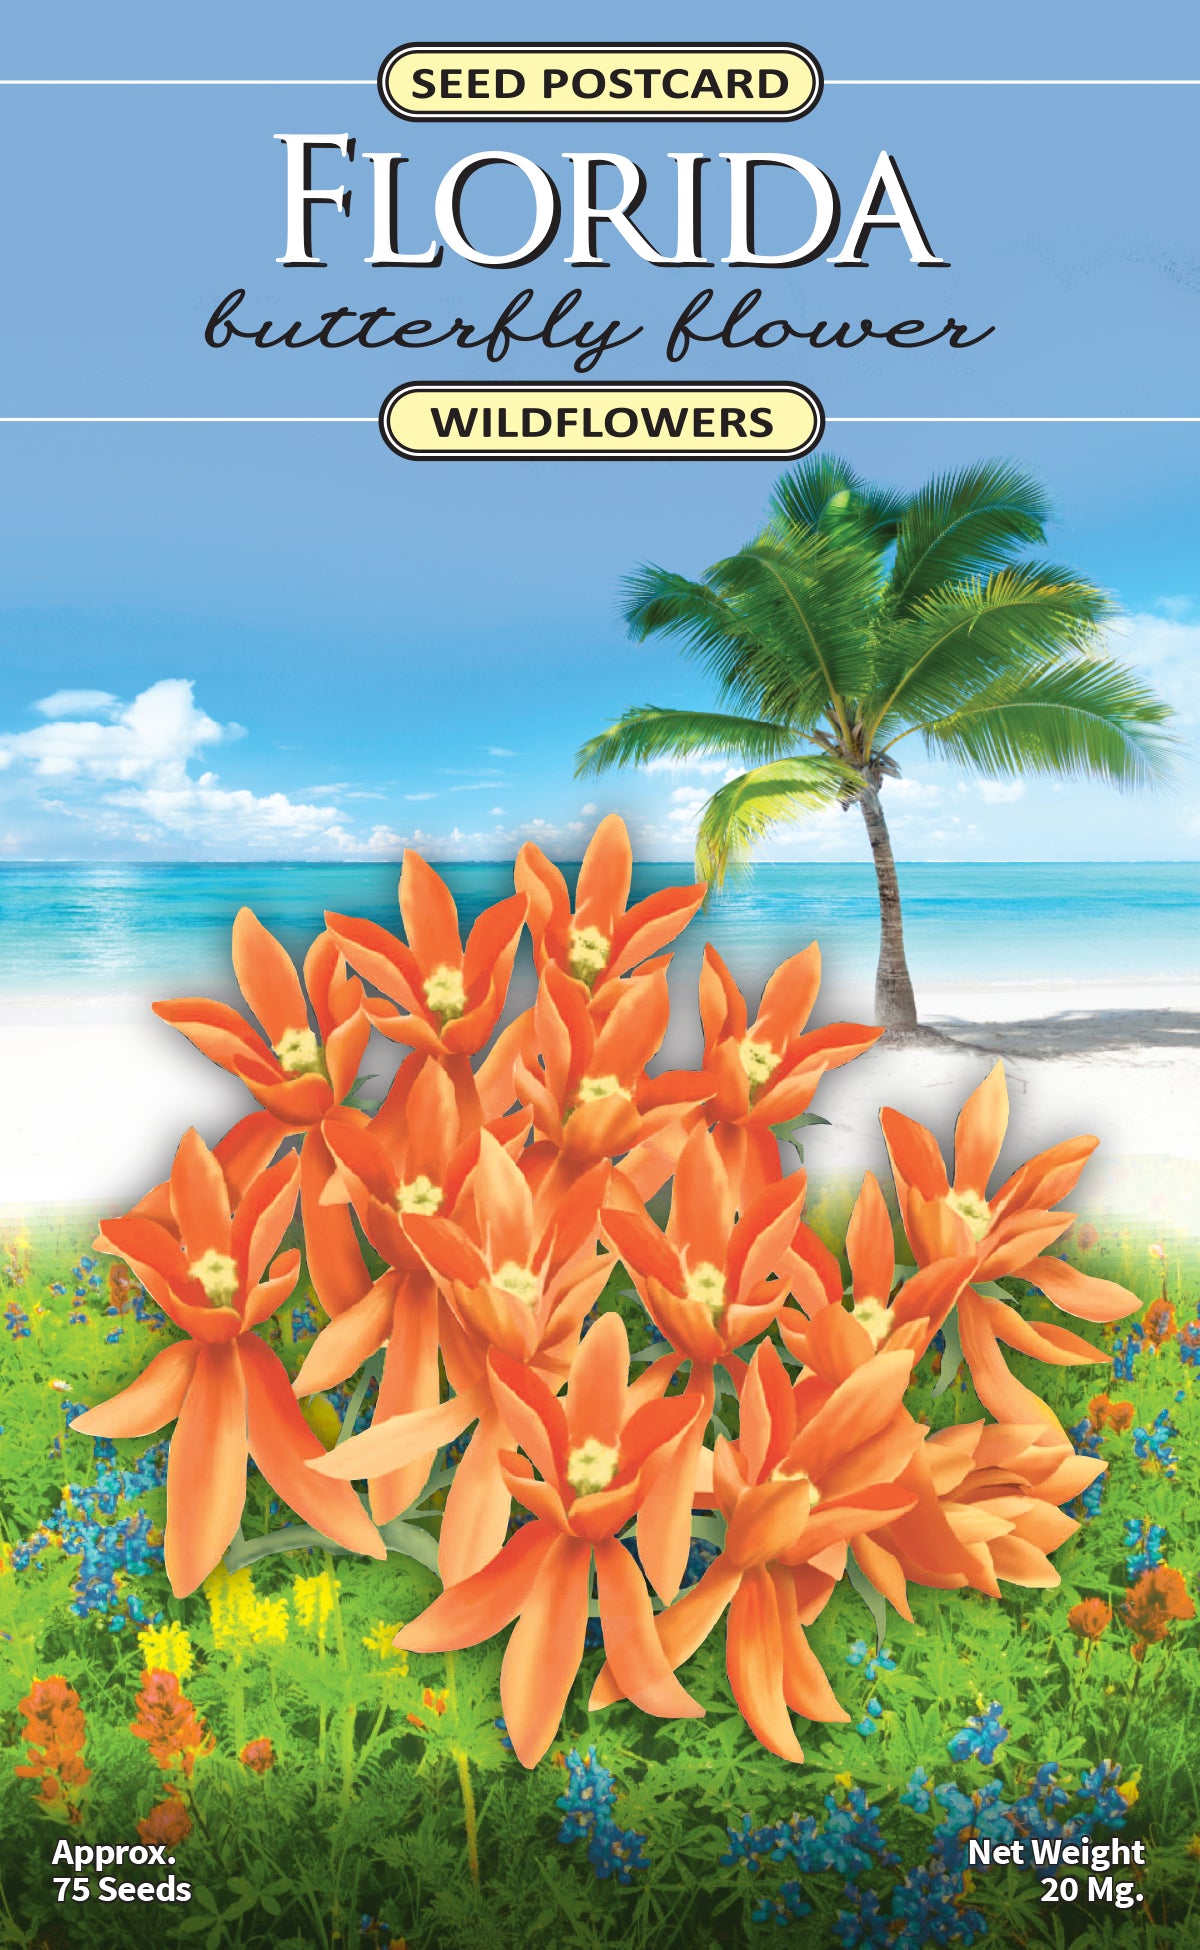 Florida Butterfly flower seed packet